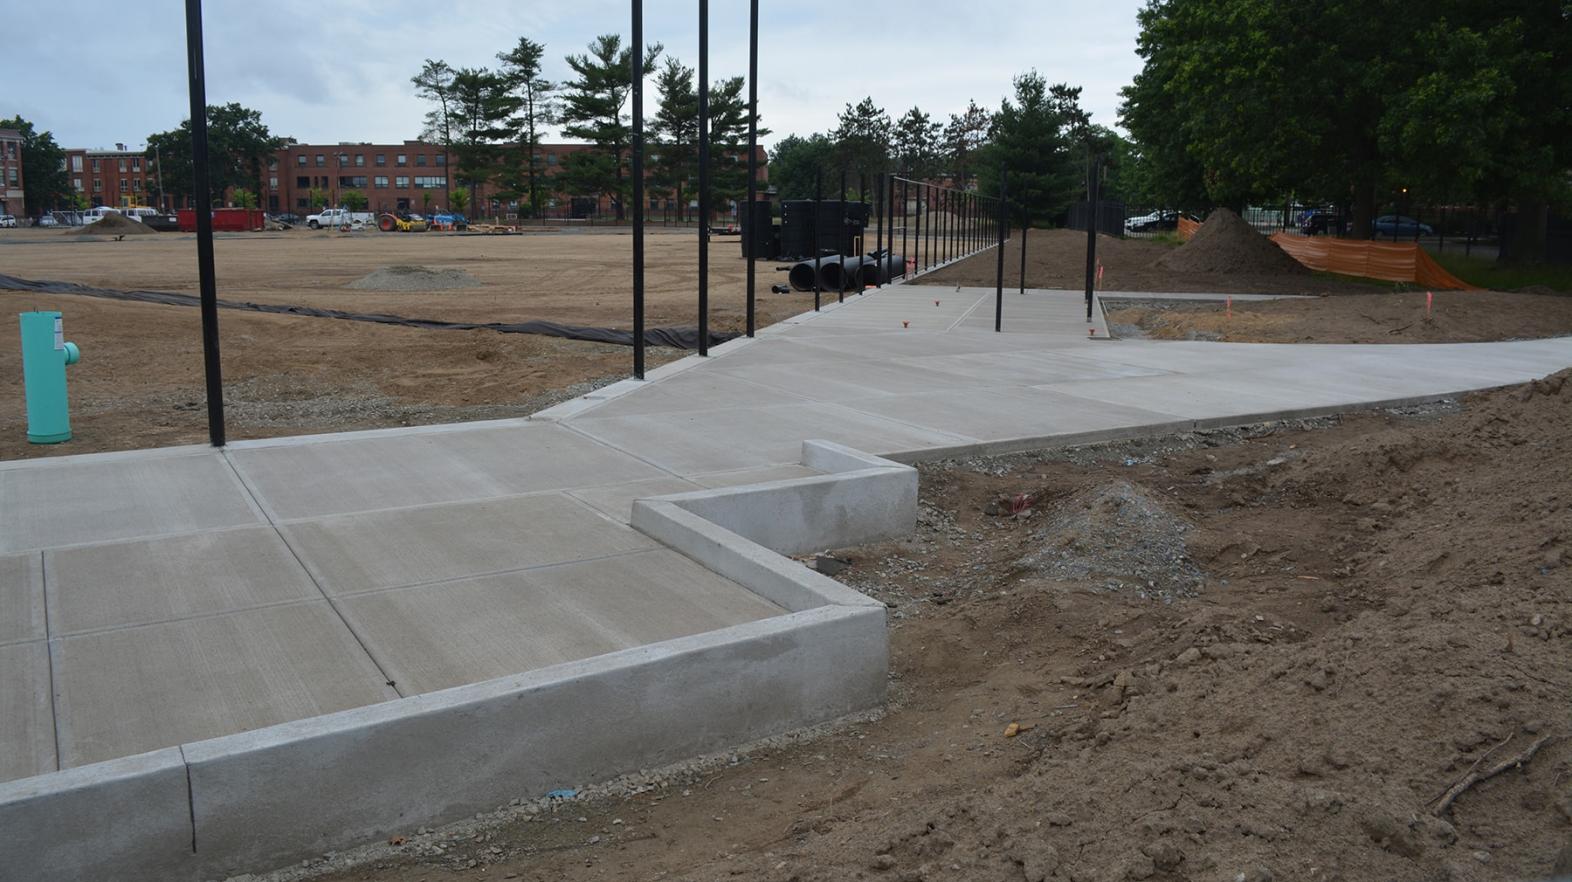 The walkway for the new adaptive field is poured and ready. (June 2017)